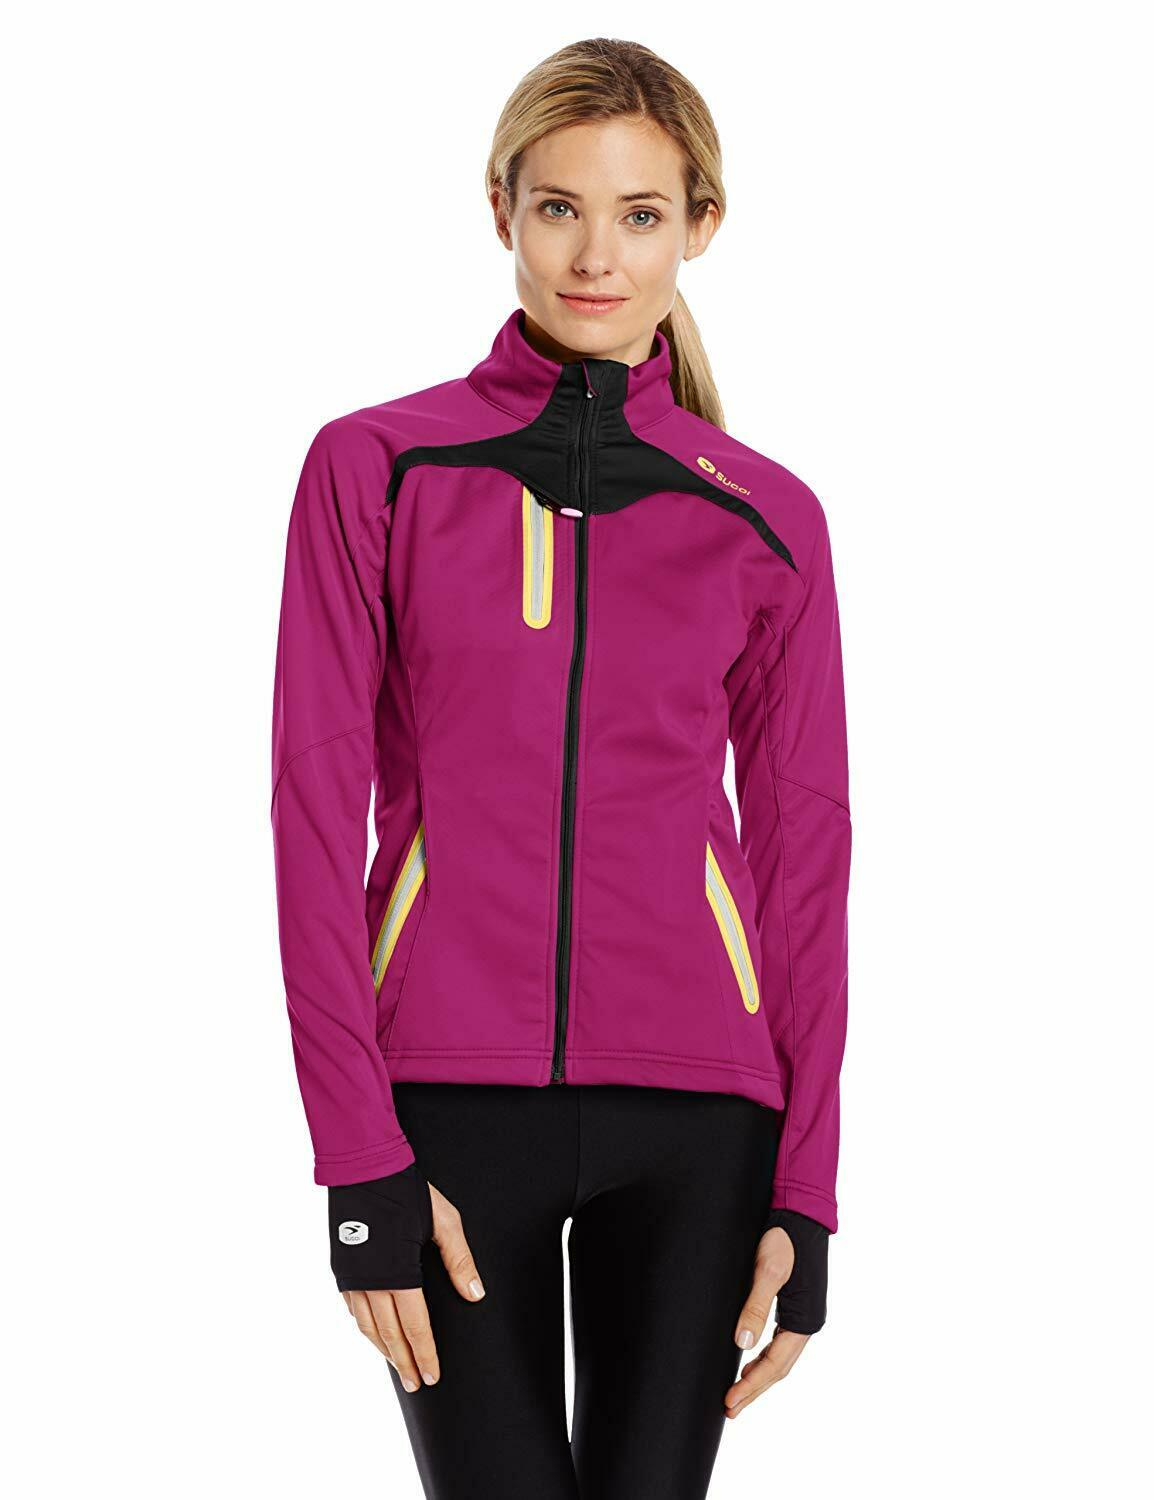 Sugoi Women’s Firewall 220 Thermal Jacket For Cycling / Running - Sportandleisure.com (6968047927450)